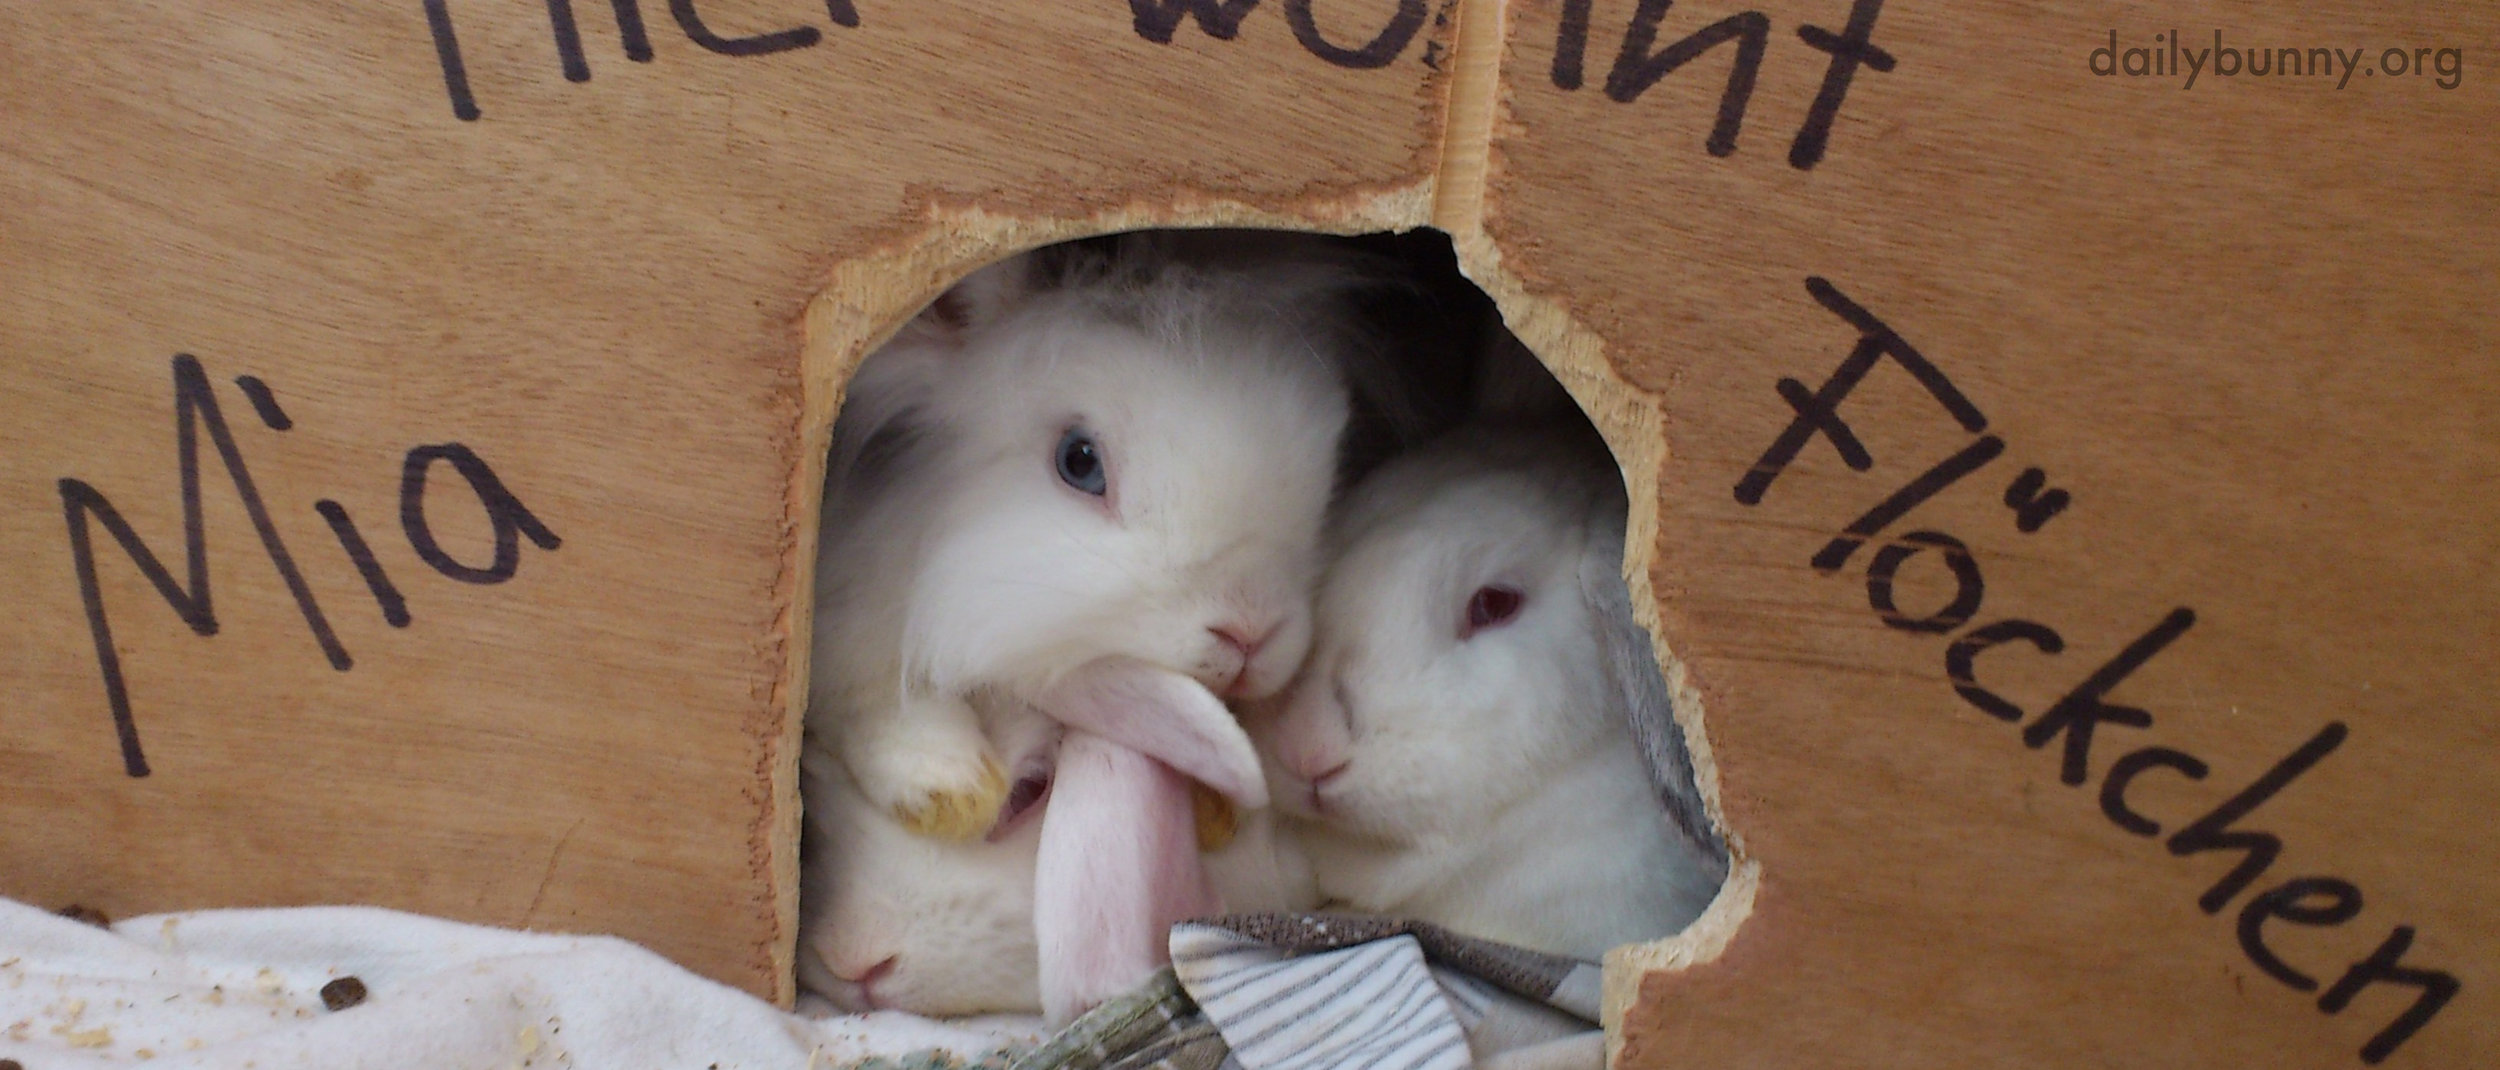 Bunnies Climb Over Each Other to Look Out of Their Box